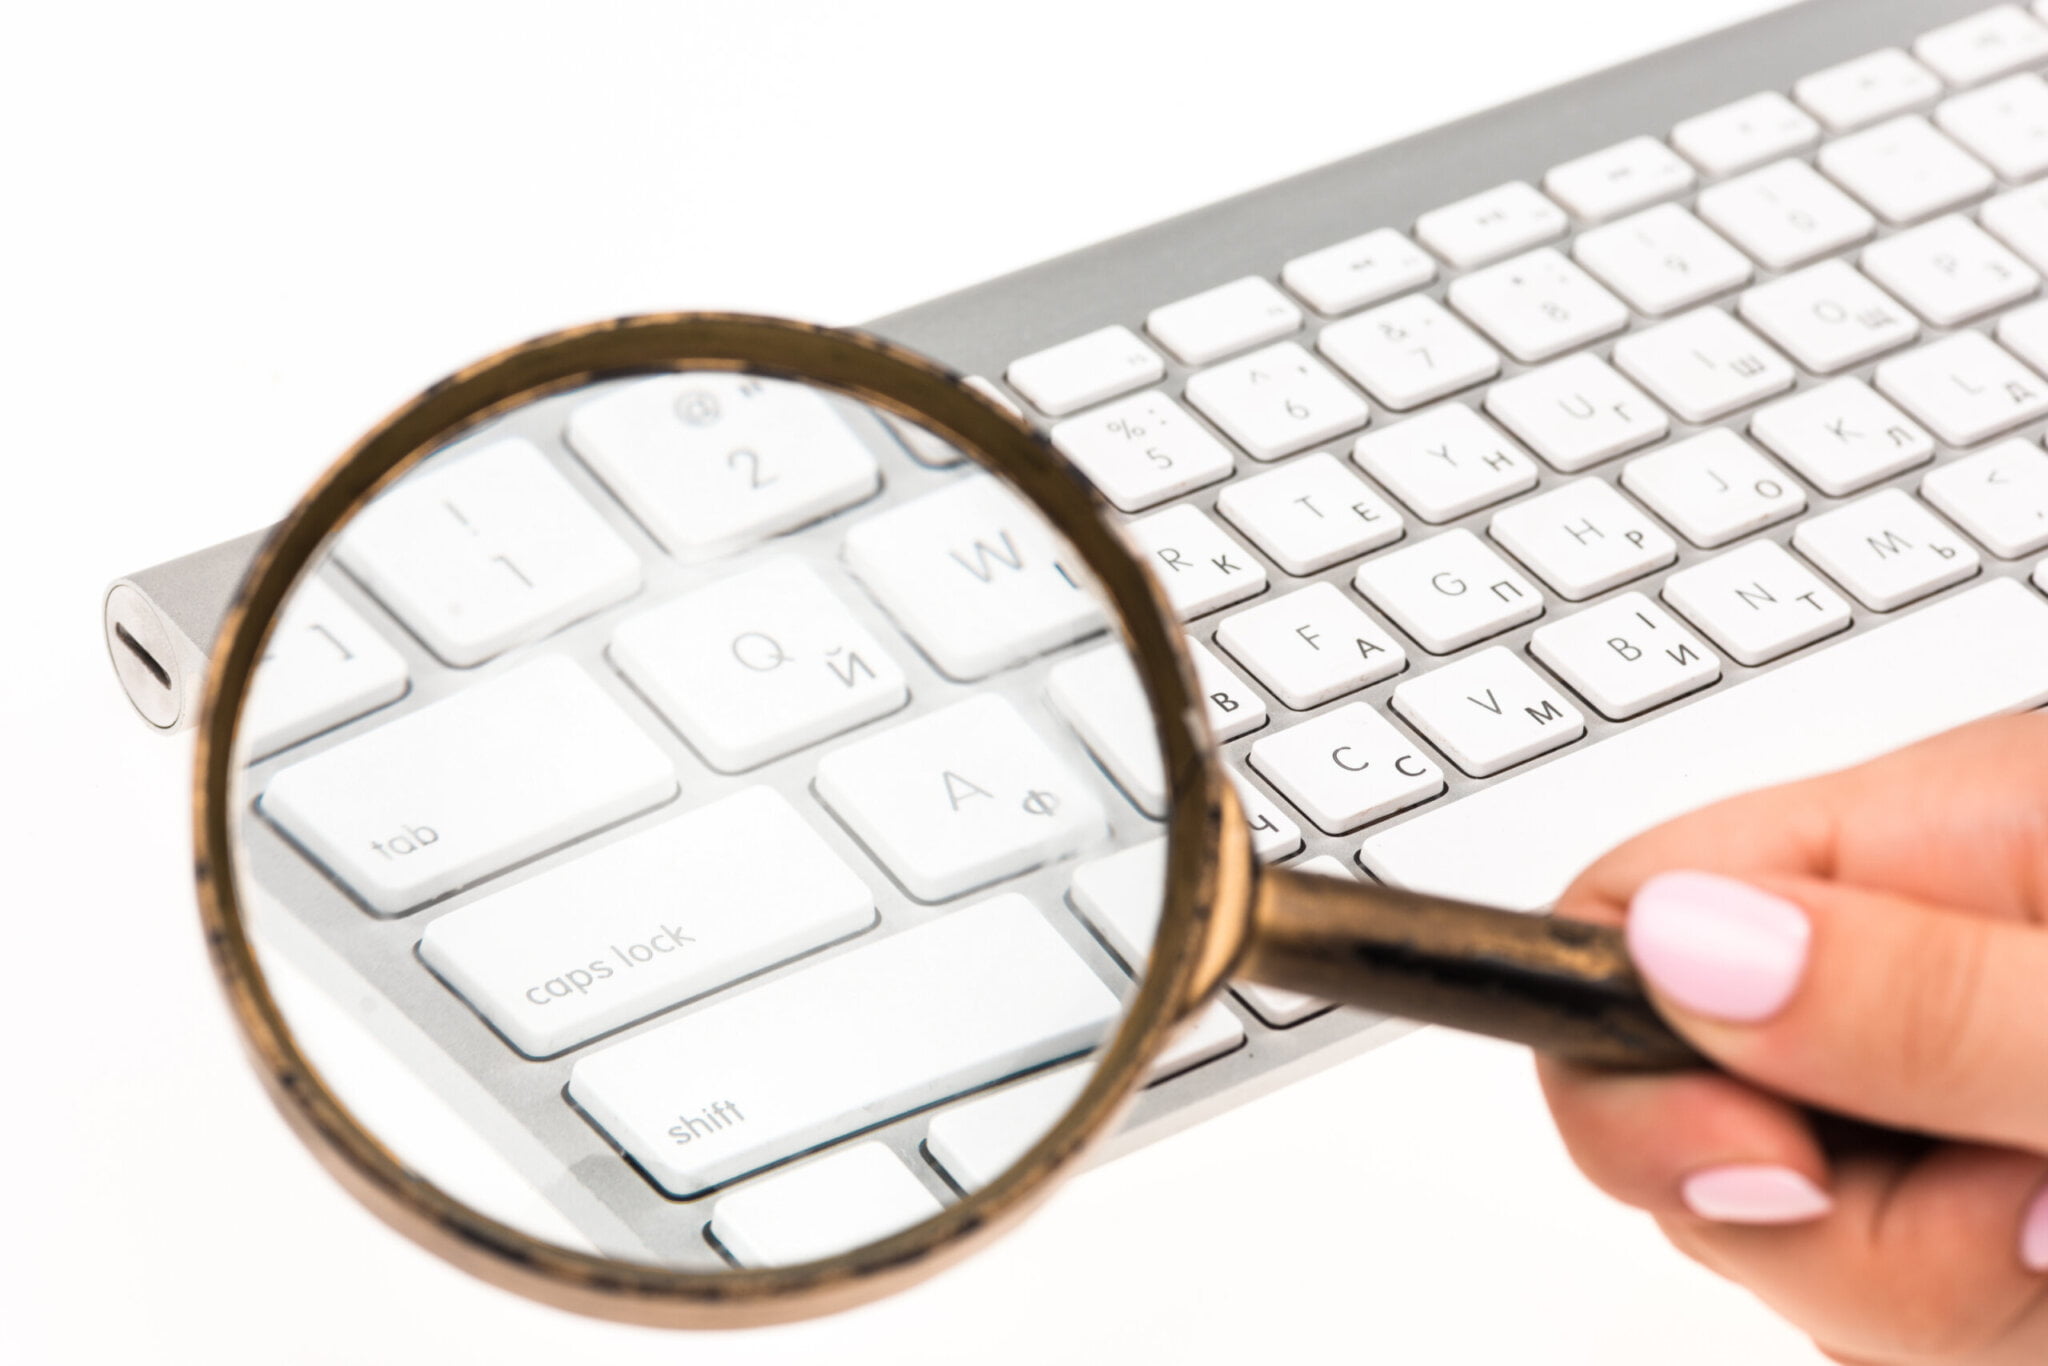 Magnifying glass over a keyboard